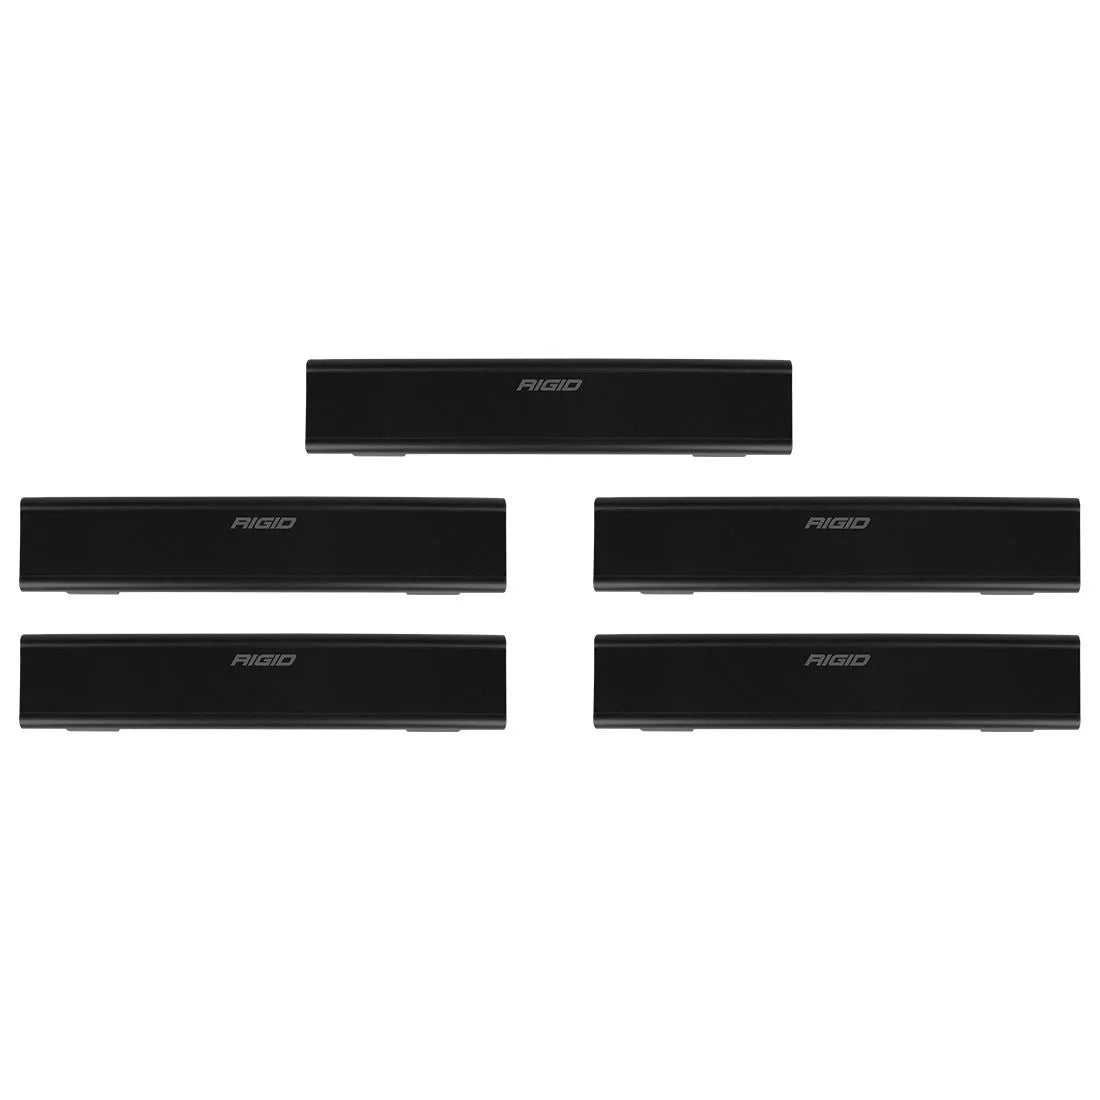 Rigid SR-Series Light Bar Covers (Sold in Sections) Sizes 6''-54'' (You will Need to Select Multiples)